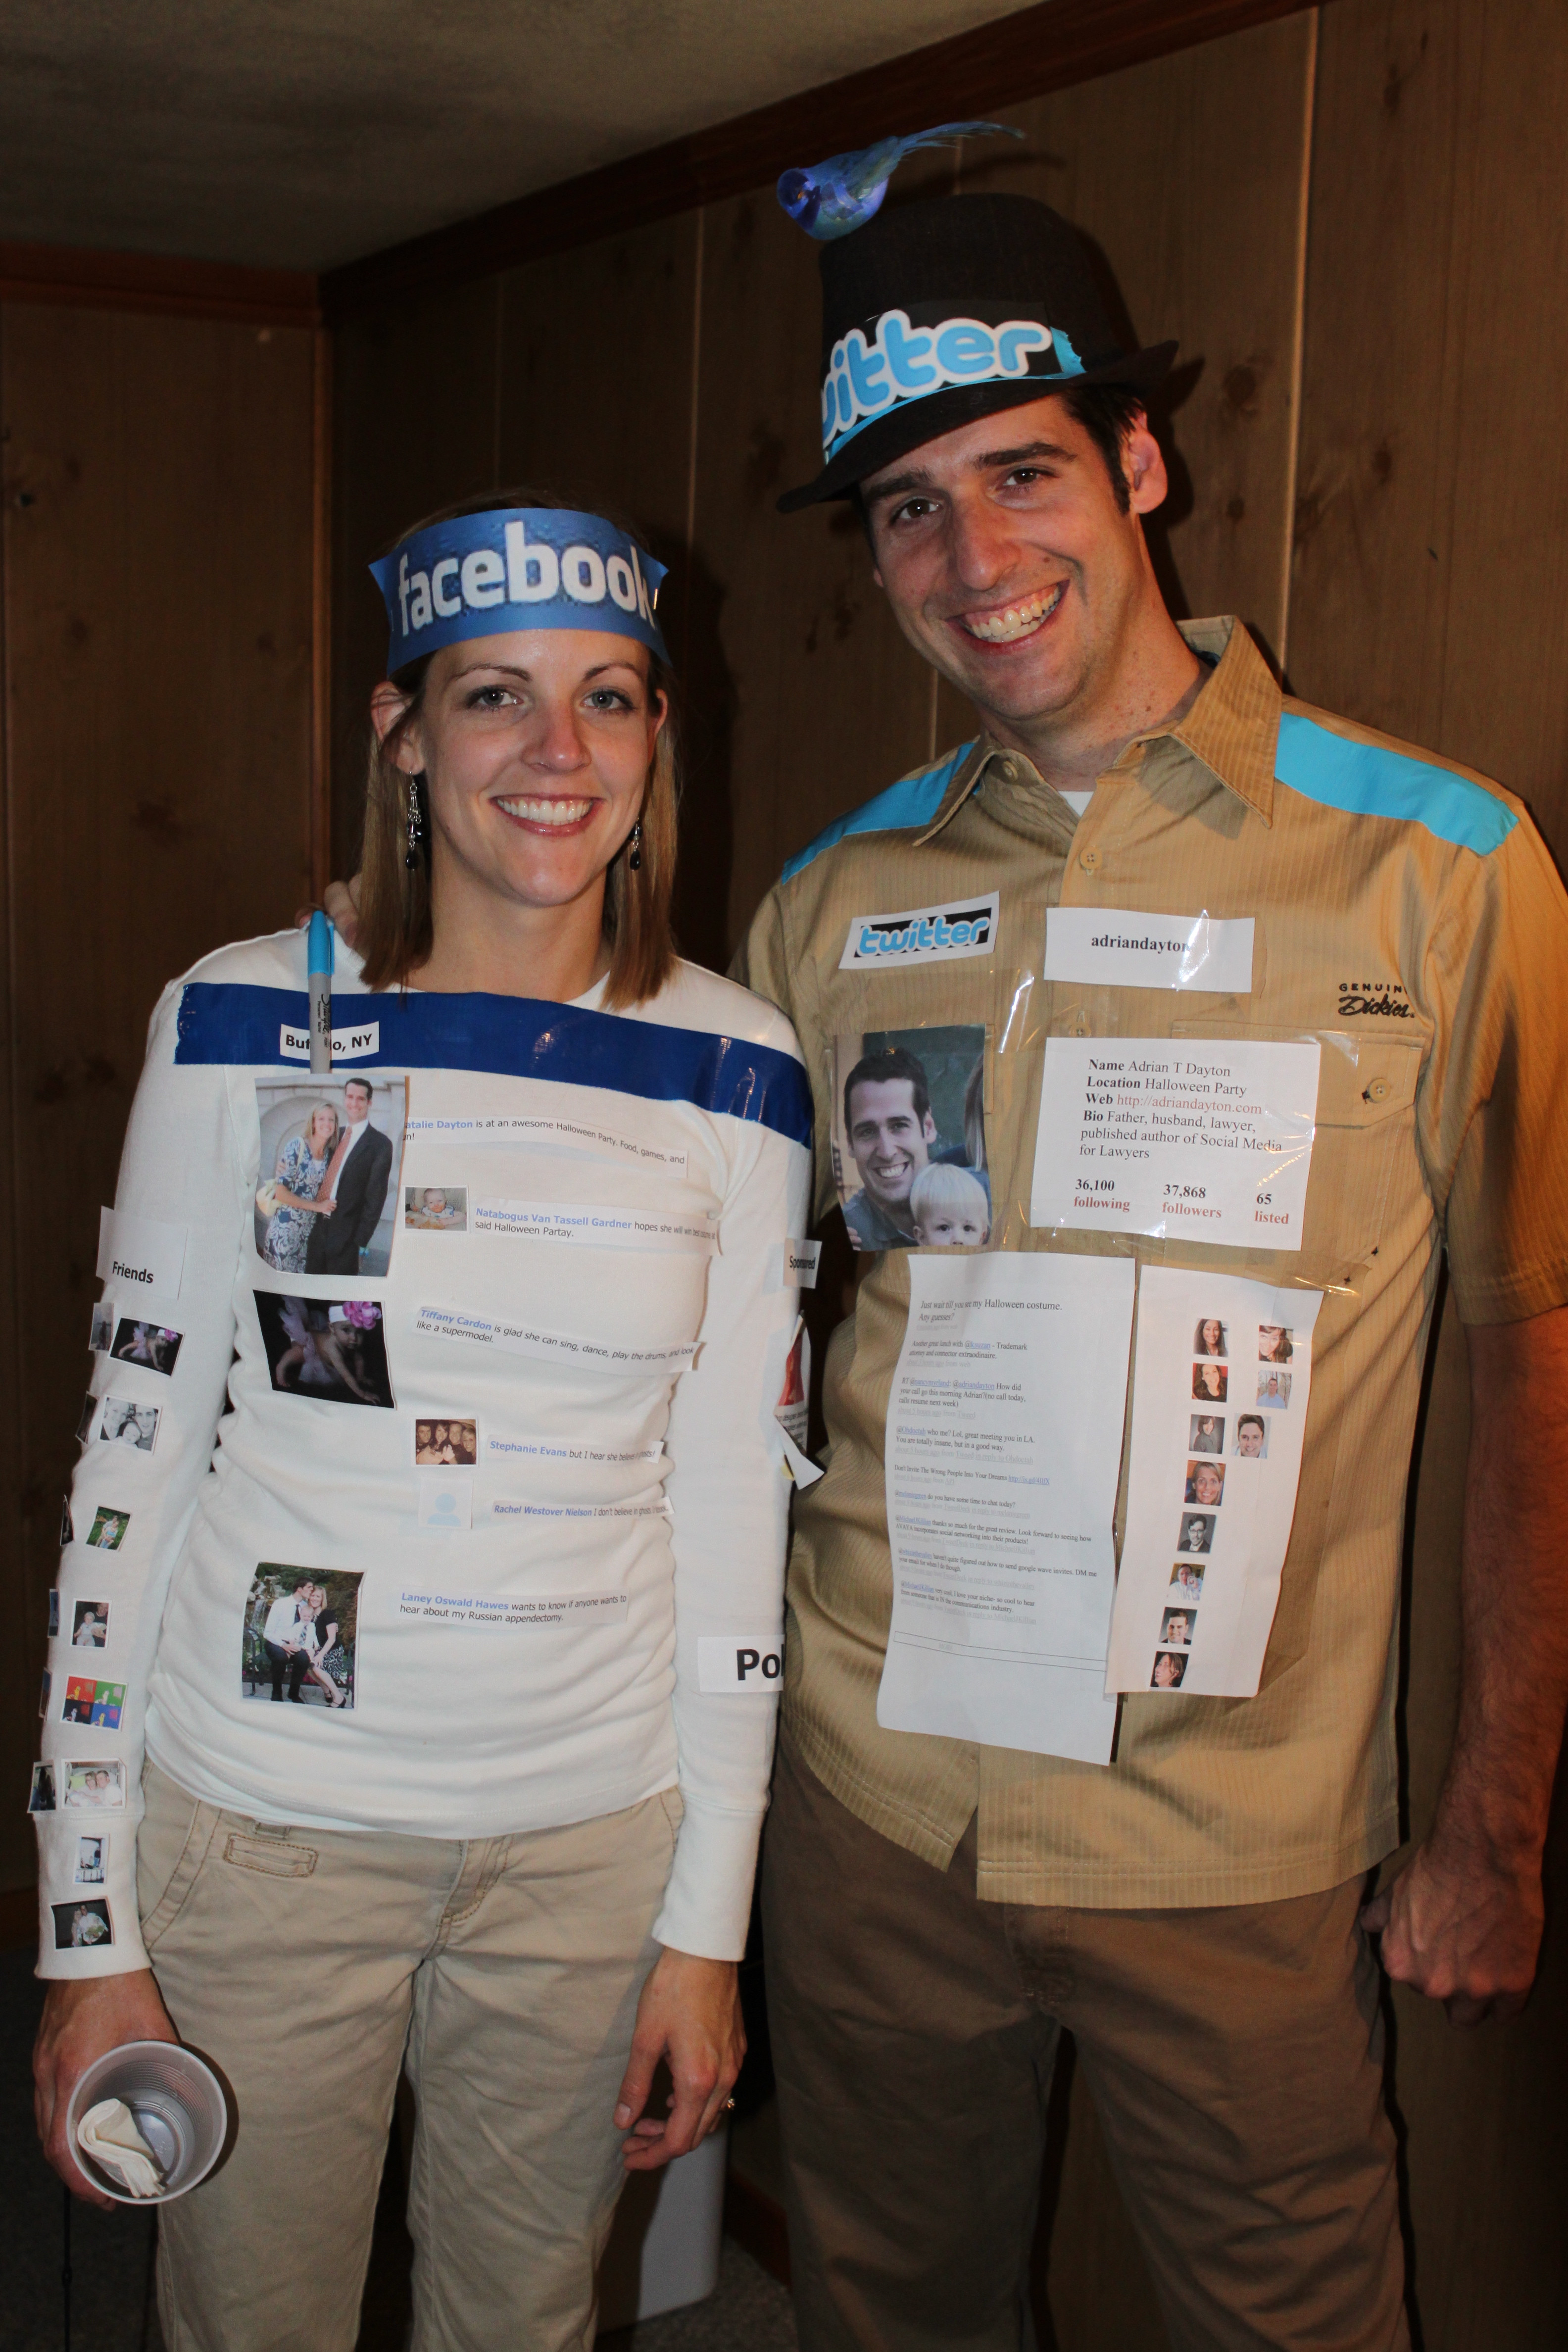 Funny DIY Couples Costumes
 The Social Media Couple Costume